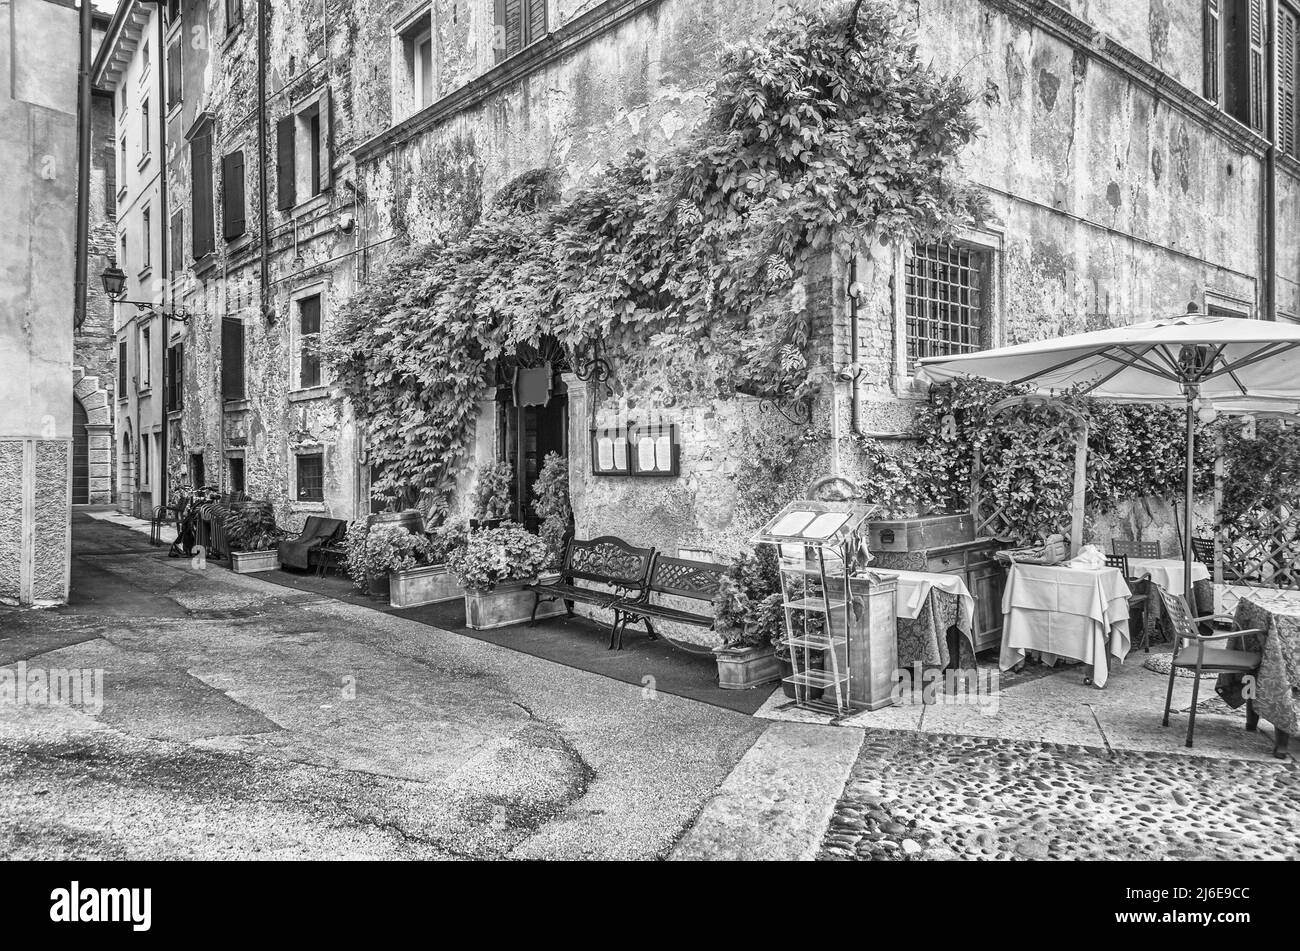 Historical medieval buildings in the old city center of Verona, Italy Stock Photo